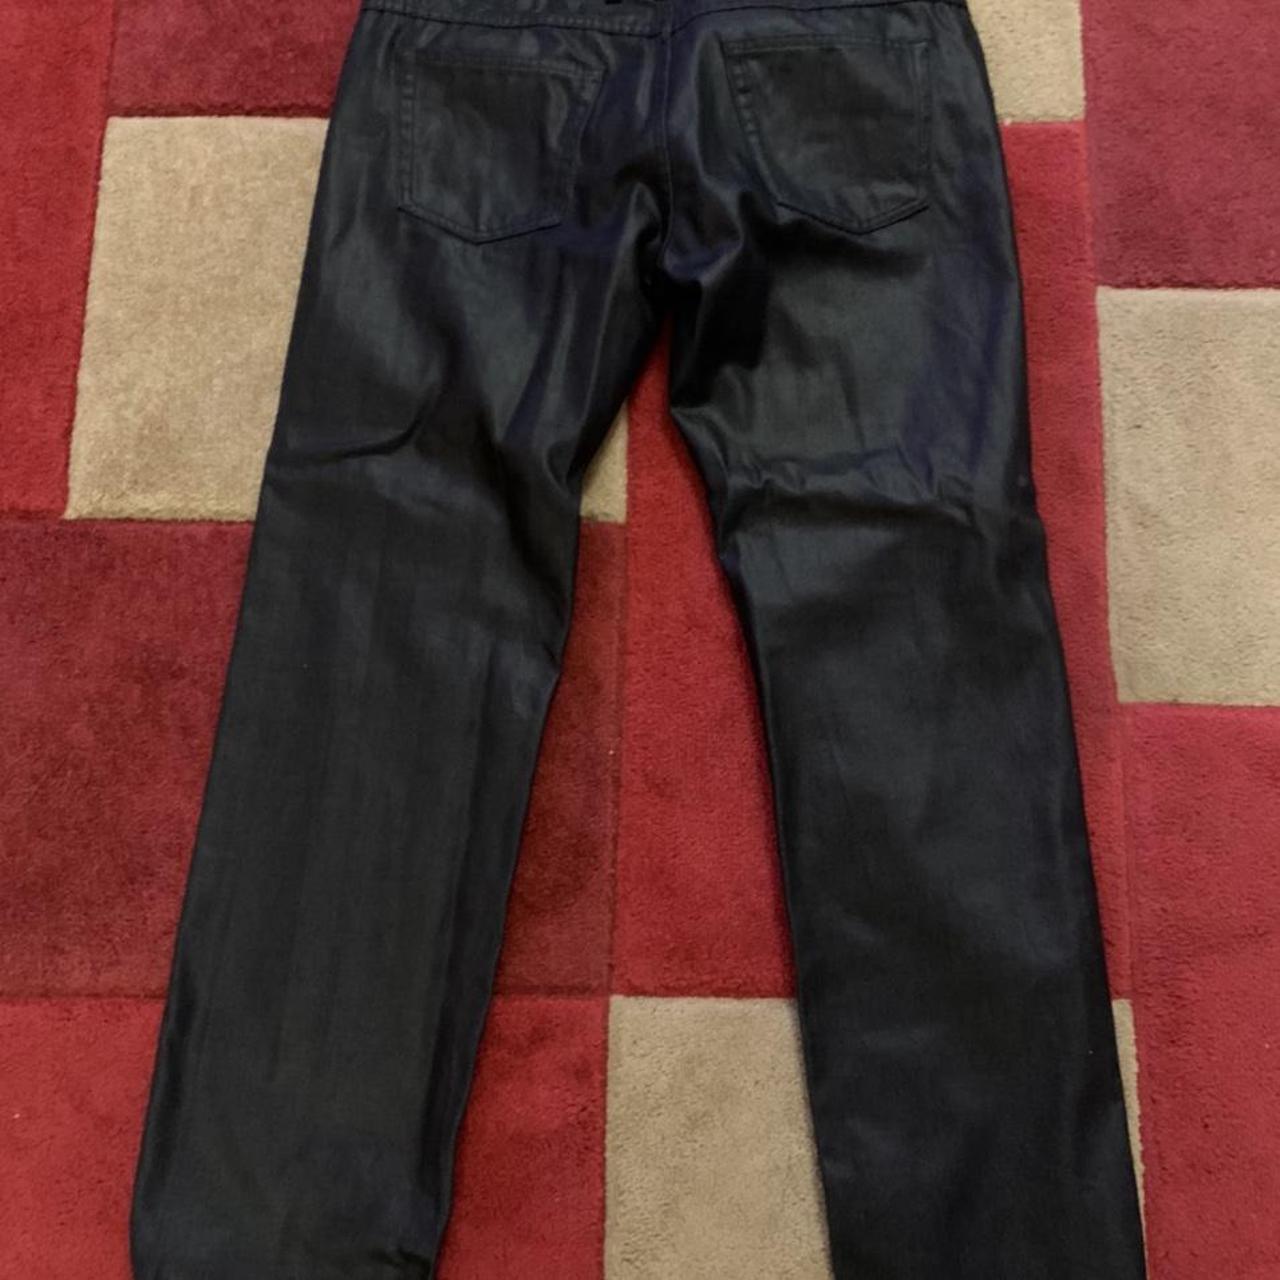 Men's Gucci jeans shiny amazing jeans never washed - Depop